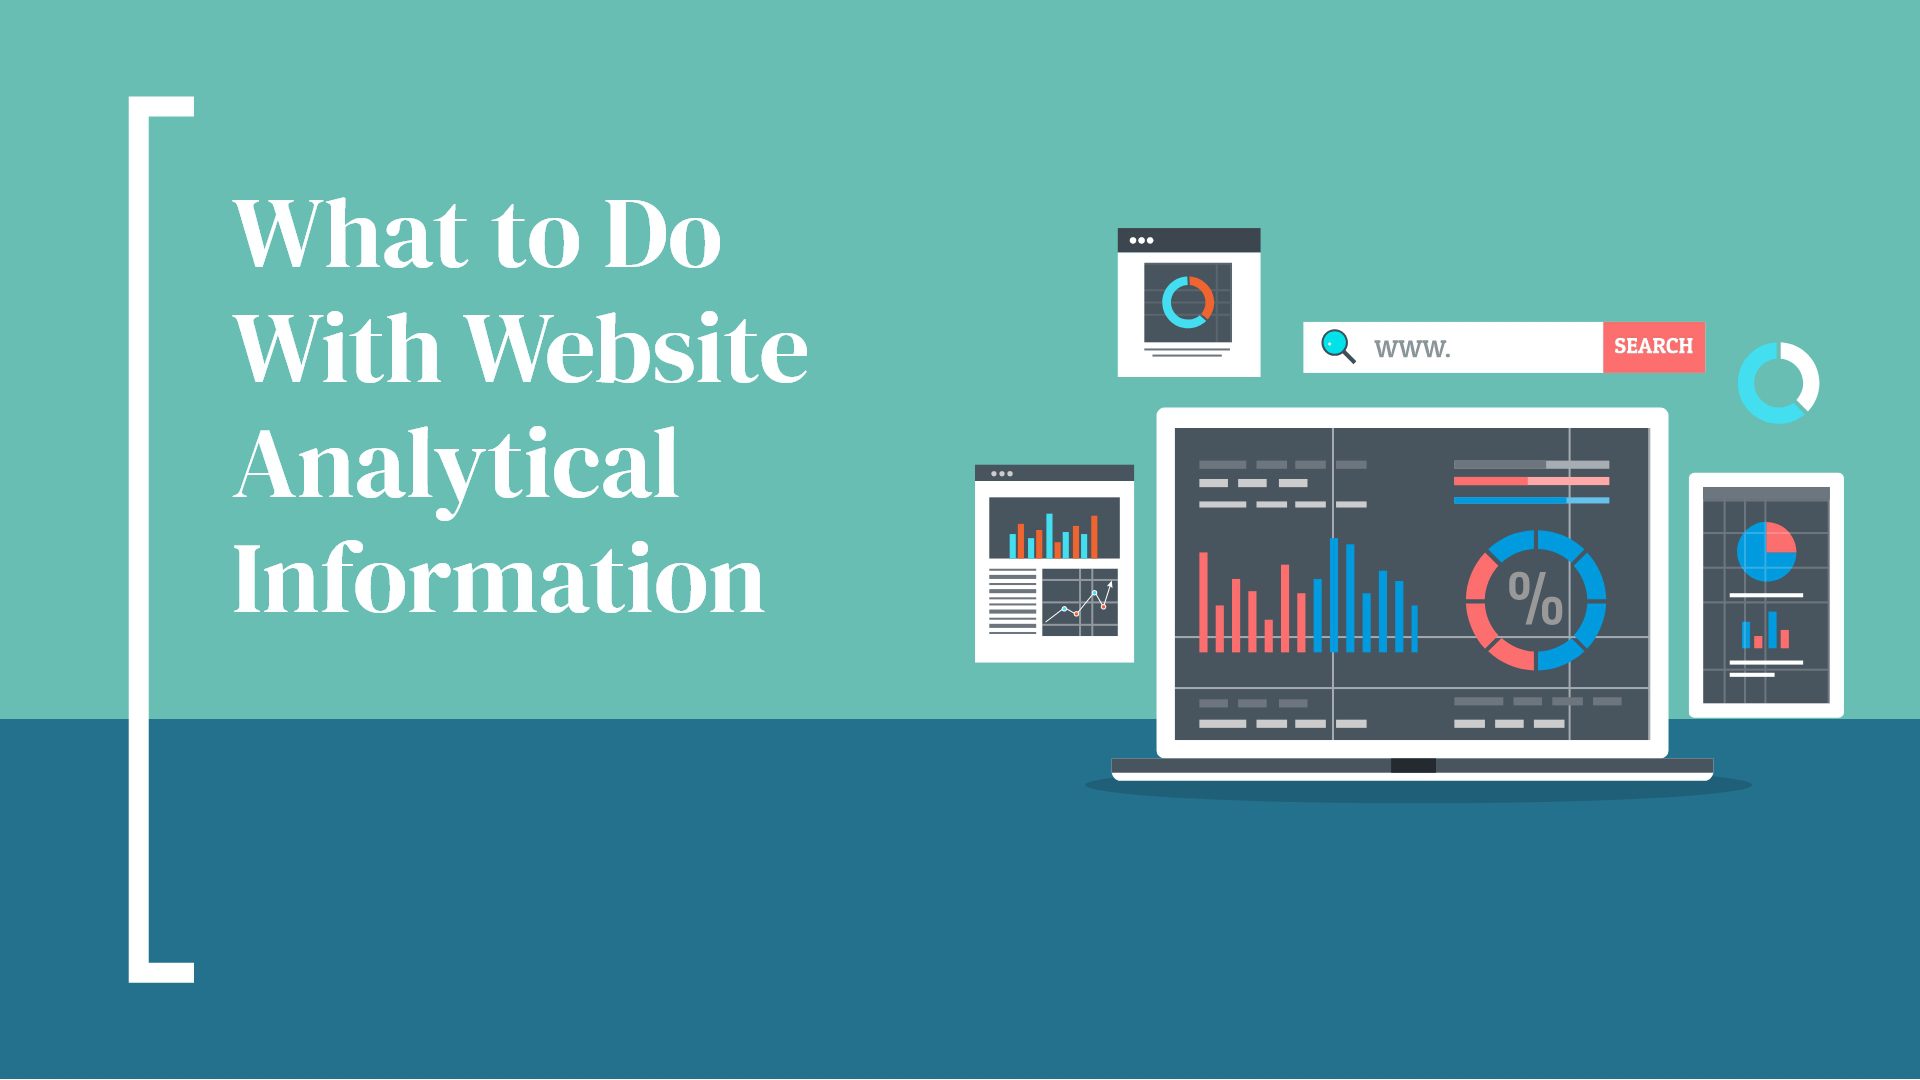 What to Do With Website Analytical Information